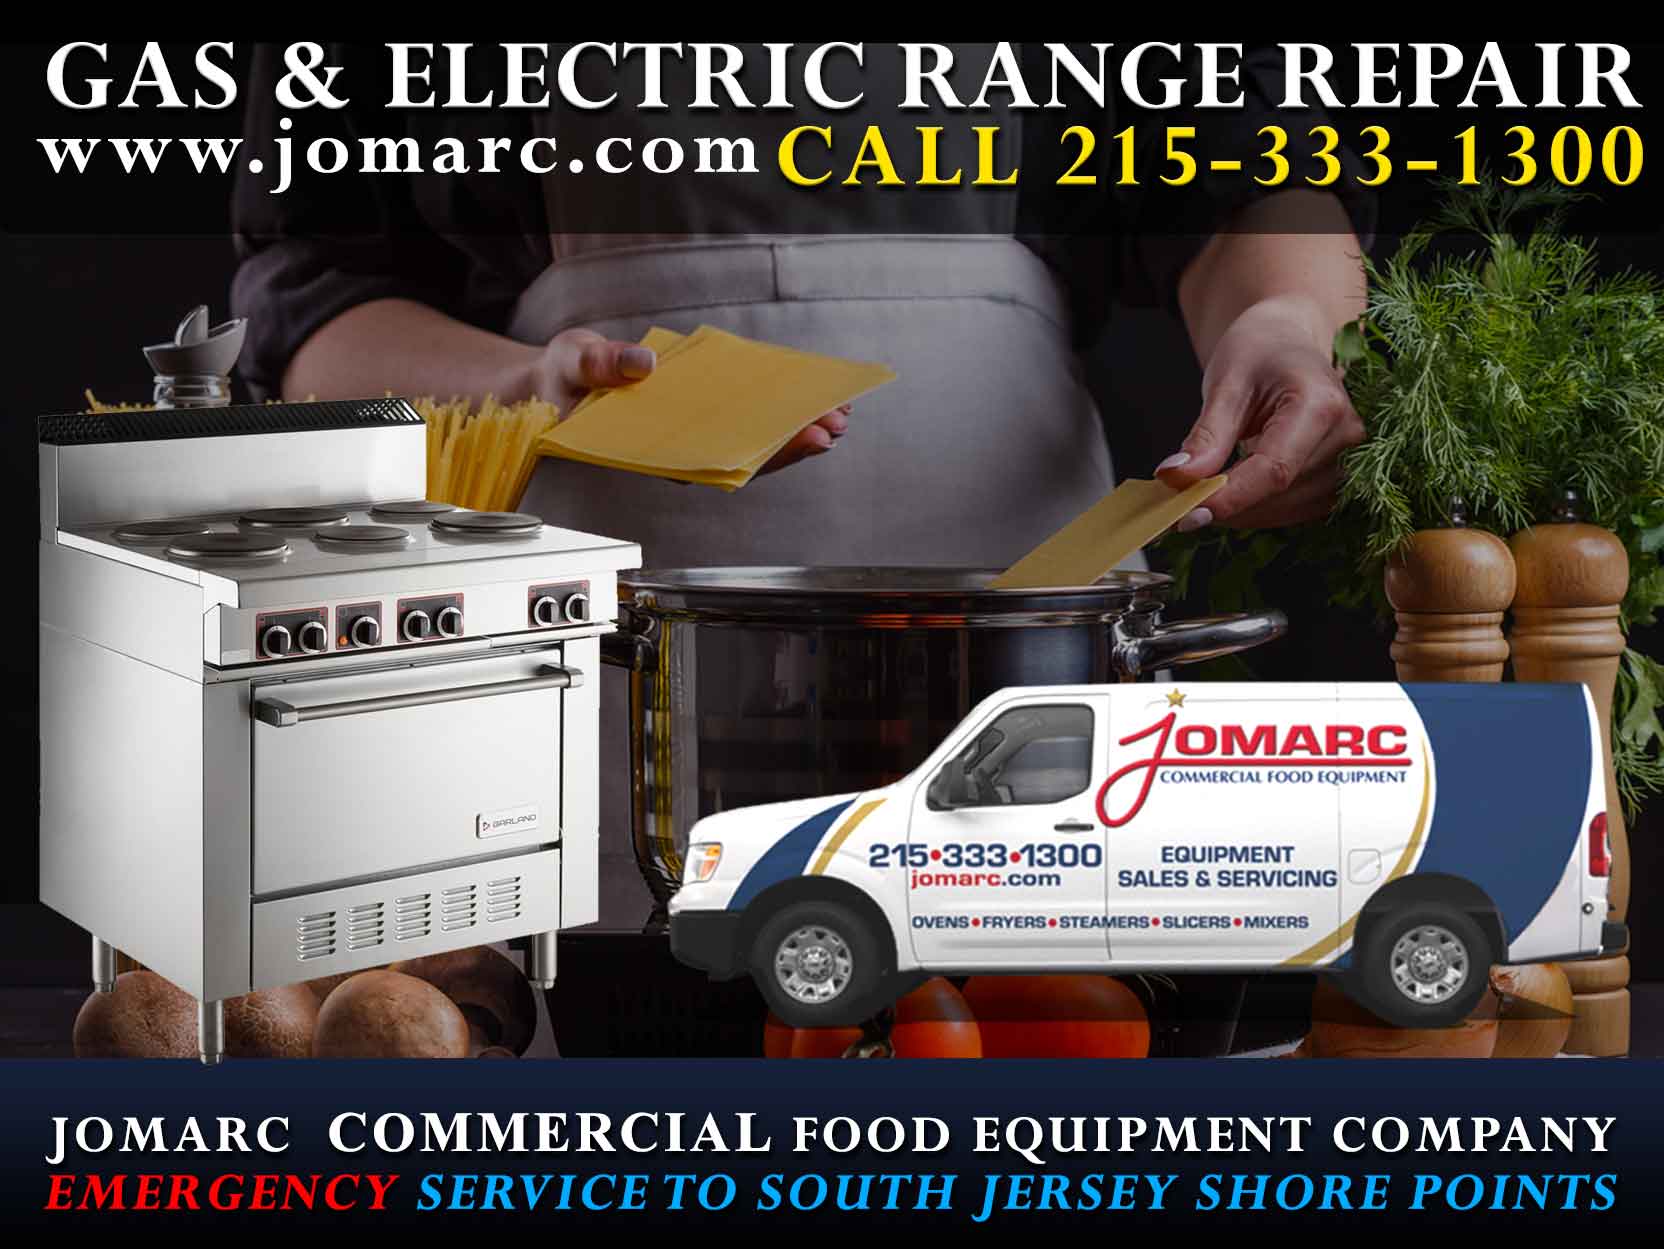 Commercial Oven Repair Philadelphia Jomarc services all brands and models of ovens: Convection Countertop Microwave Combination Ovens Conveyor and Impinger Rapid Cook / High Speed Rotisserie Multi-Cook Bakery Cook and Hold Cabinets Indoor Roaster Smoker Microwaves Light Duty Medium Duty Heavy Duty 